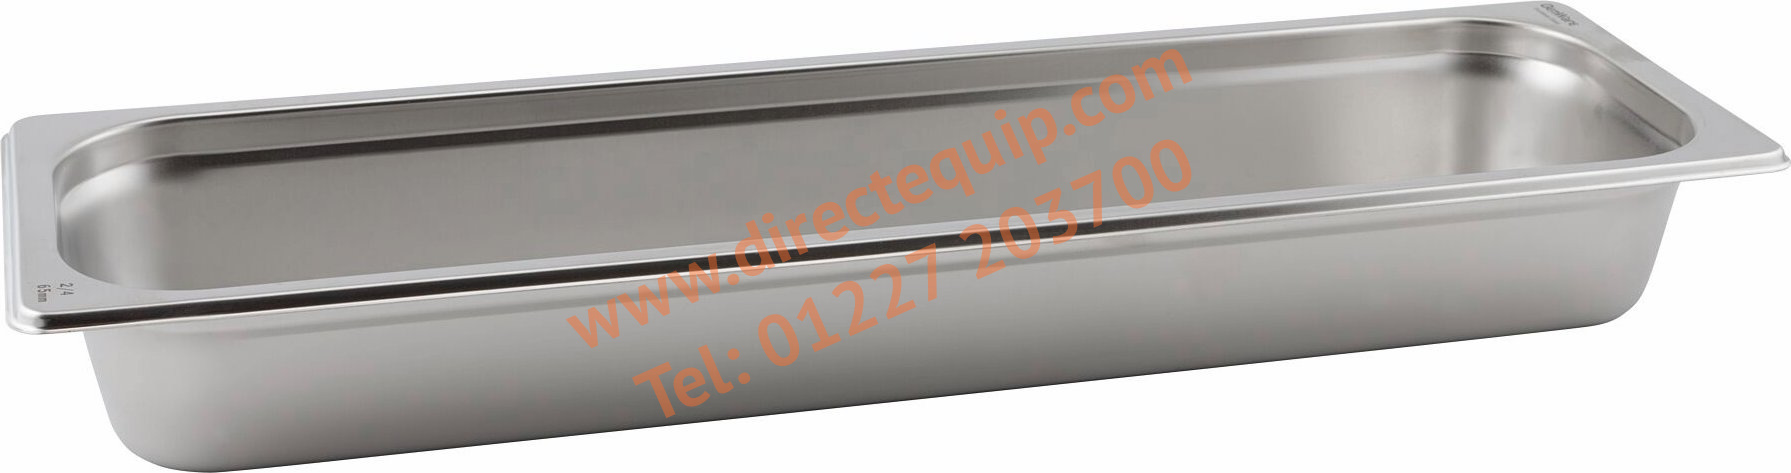 GN 24-65 Stainless Steel Gastronorm